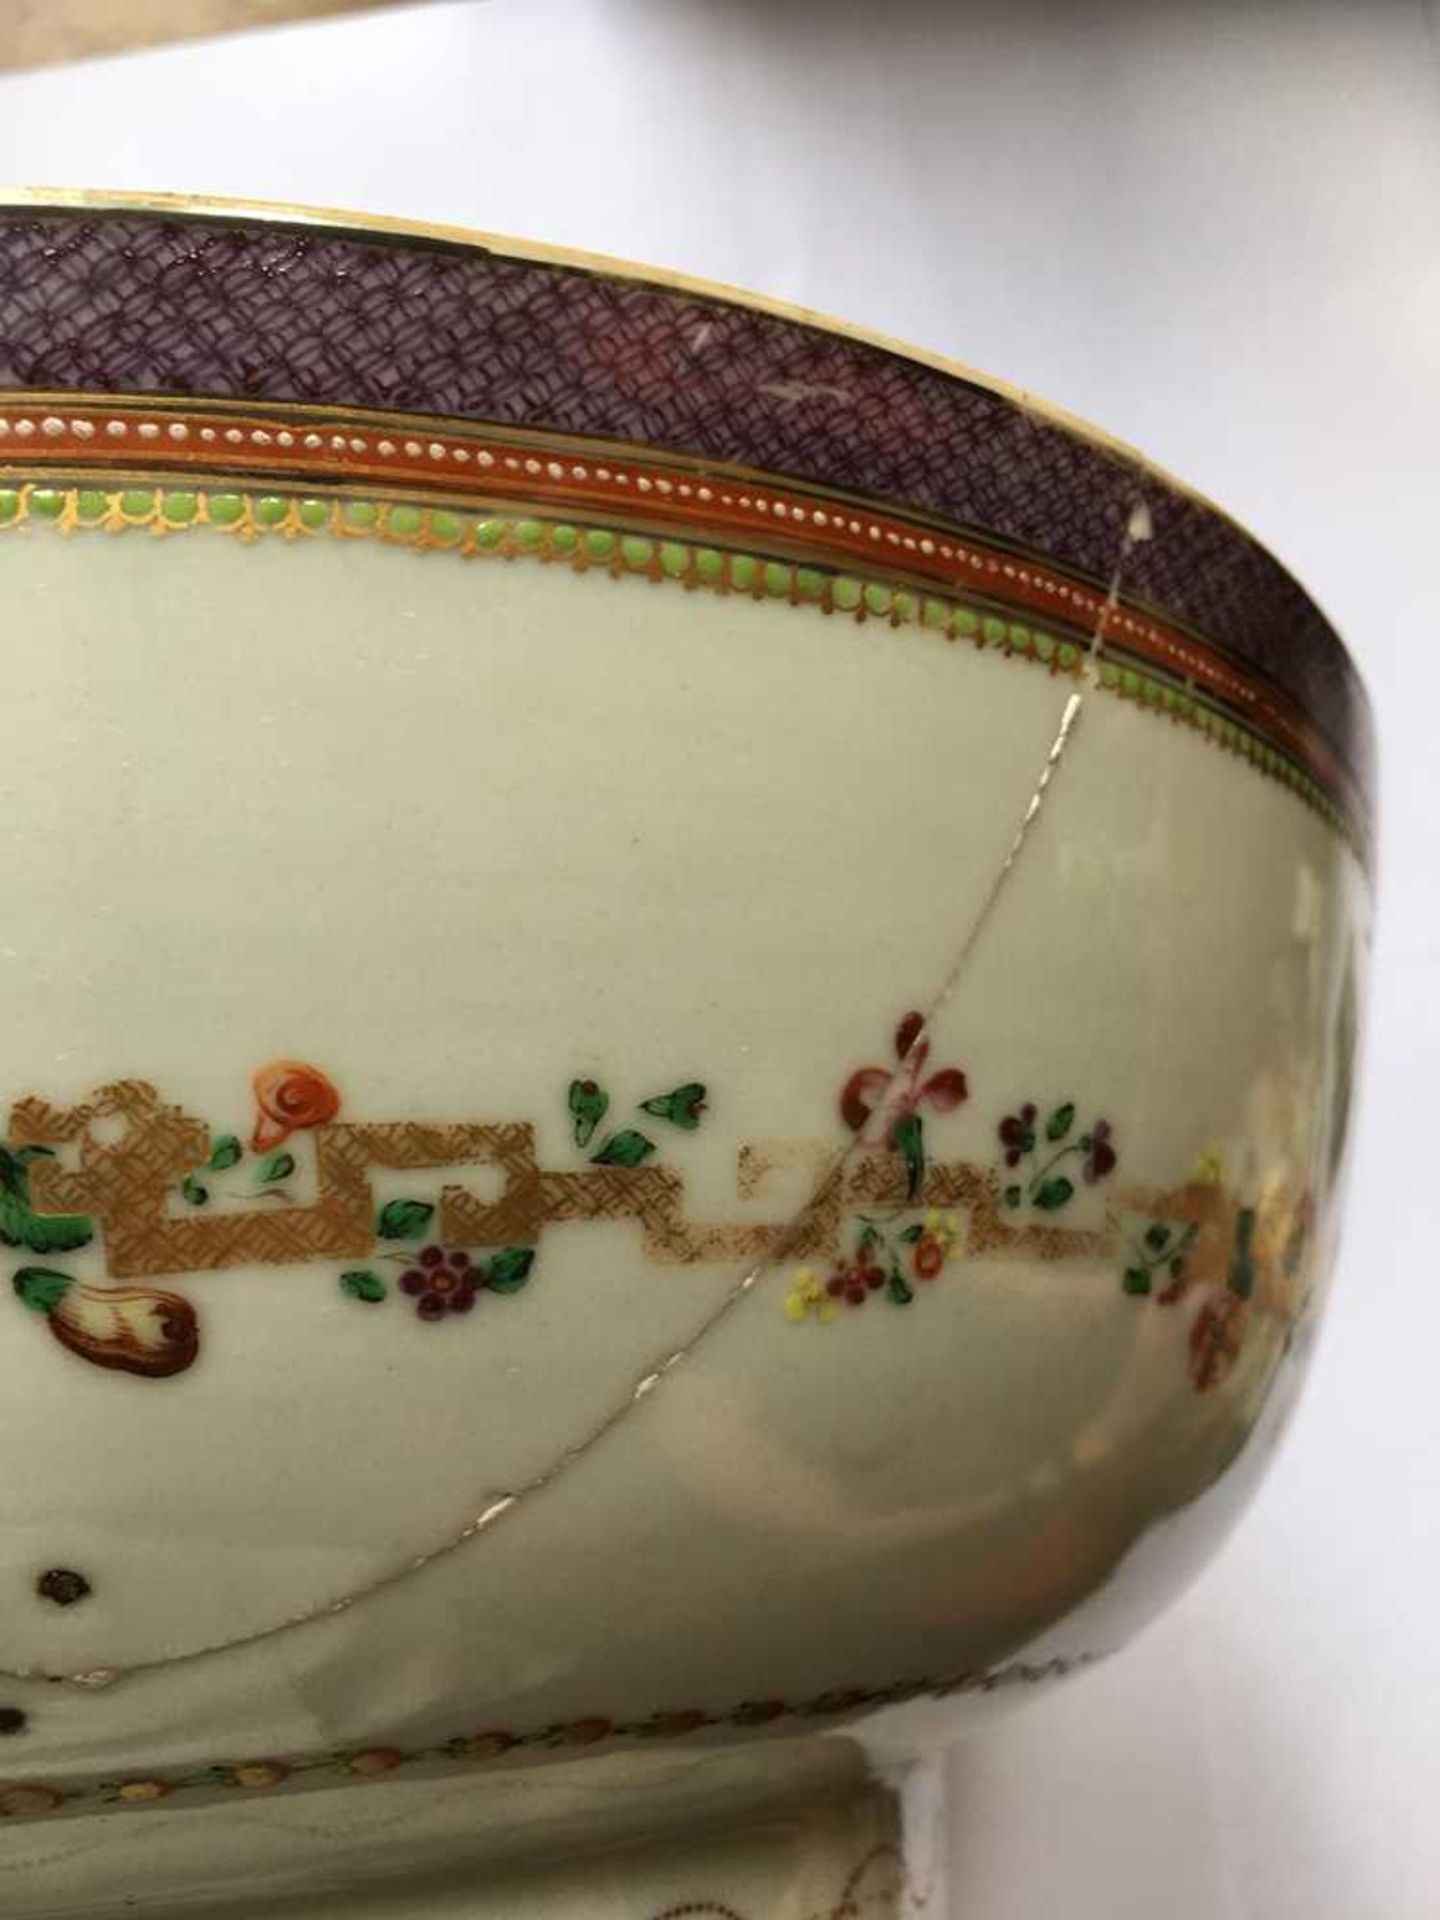 TWO CHINESE EXPORT PORCELAIN PUNCH BOWLS QING DYNASTY, LATE 18TH/19TH CENTURY - Image 12 of 33